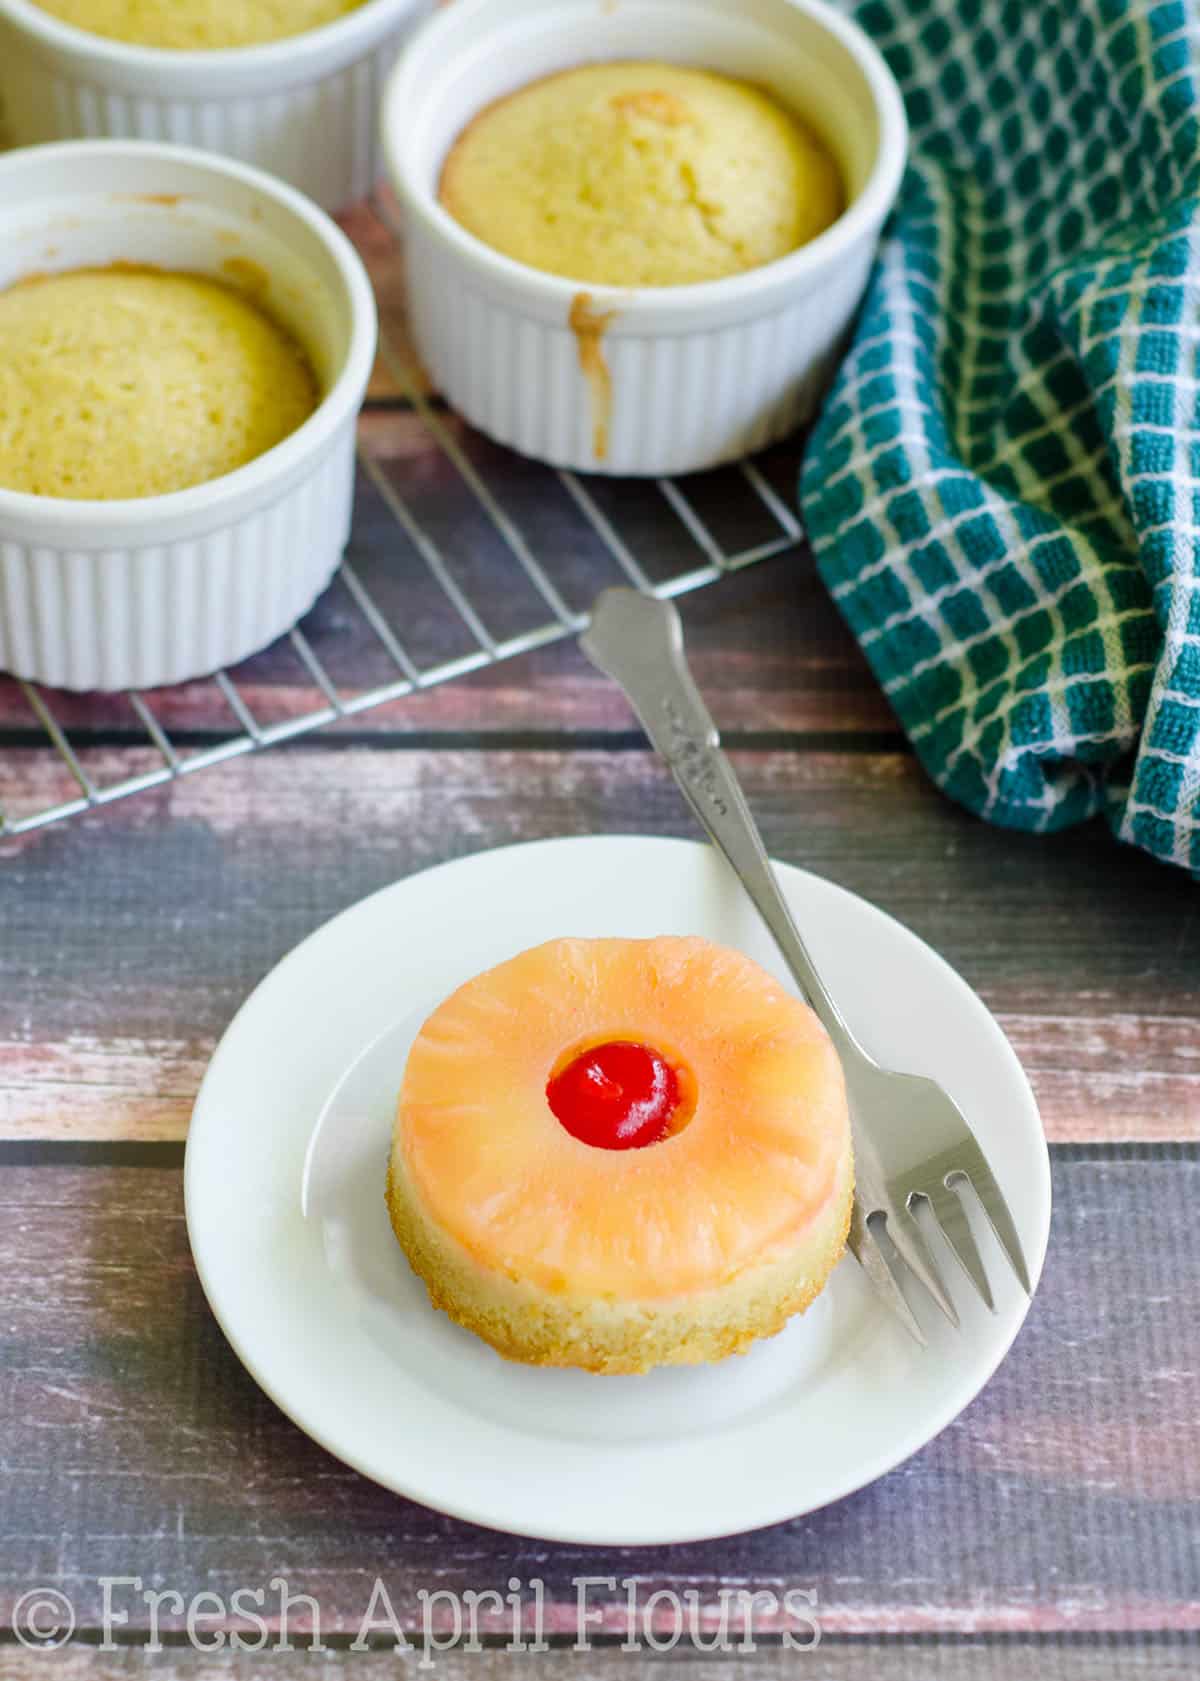 Mini pineapple upside down cake on a plate with a fork.